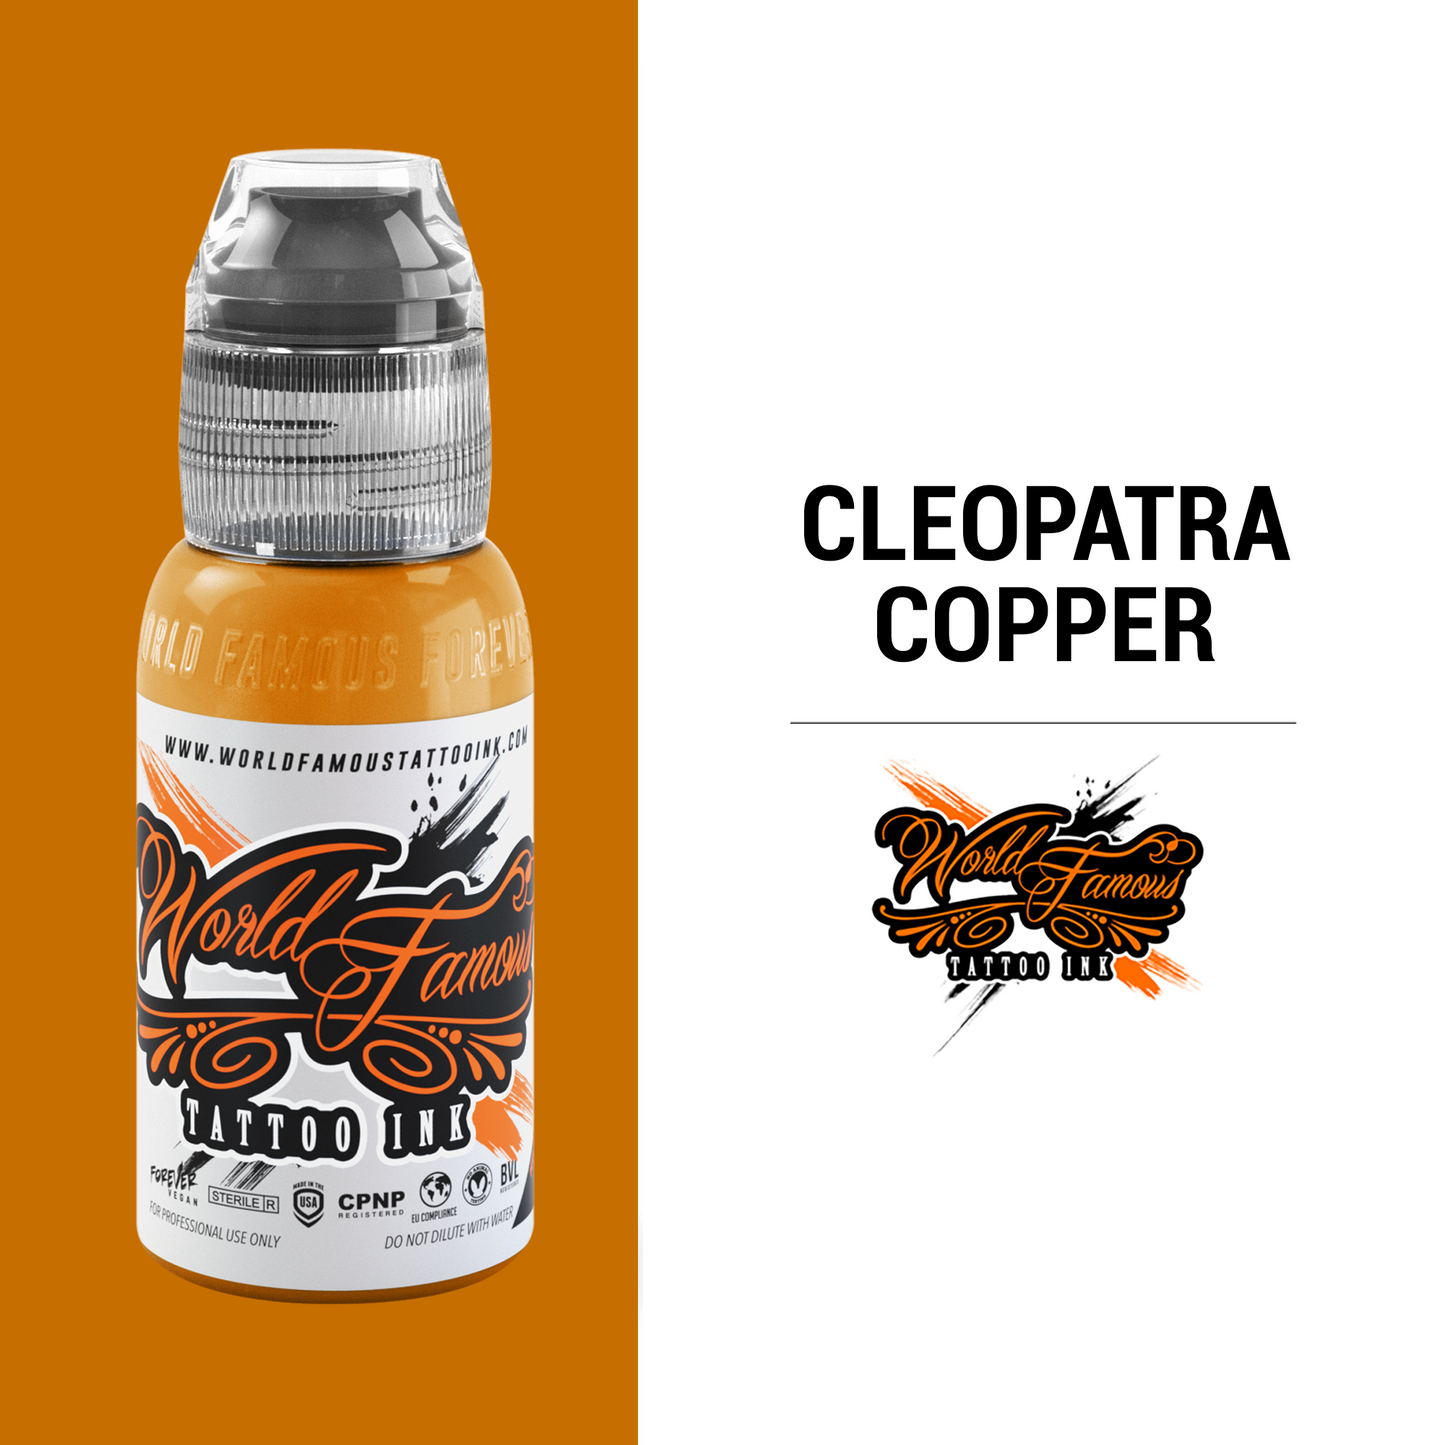 Cleopatra Copper | World Famous Tattoo Ink